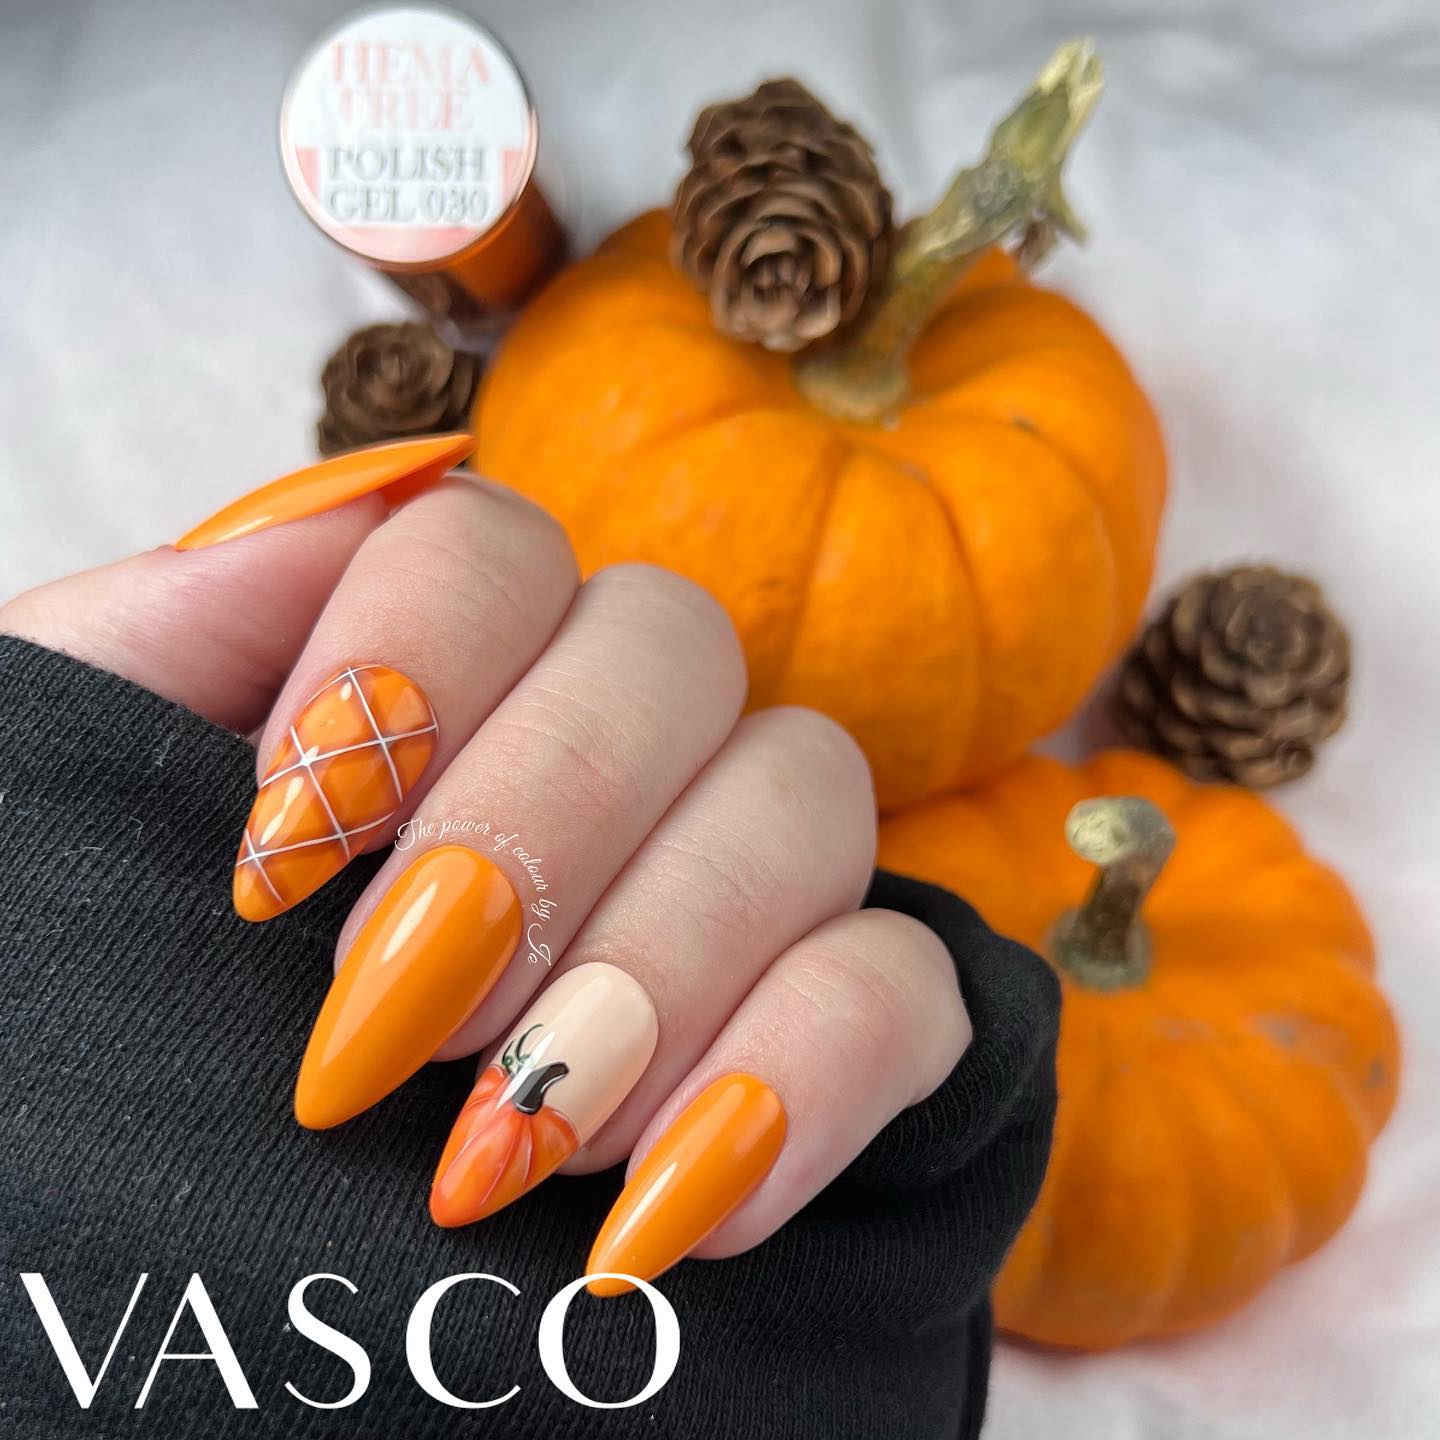 This nail design is adorable! It's so fun and cute. The way you can see the pumpkin on the accent nail is fabulous. The orange color is very vibrant, which is great for fall. It's a nice change from other designs that have been popular lately.